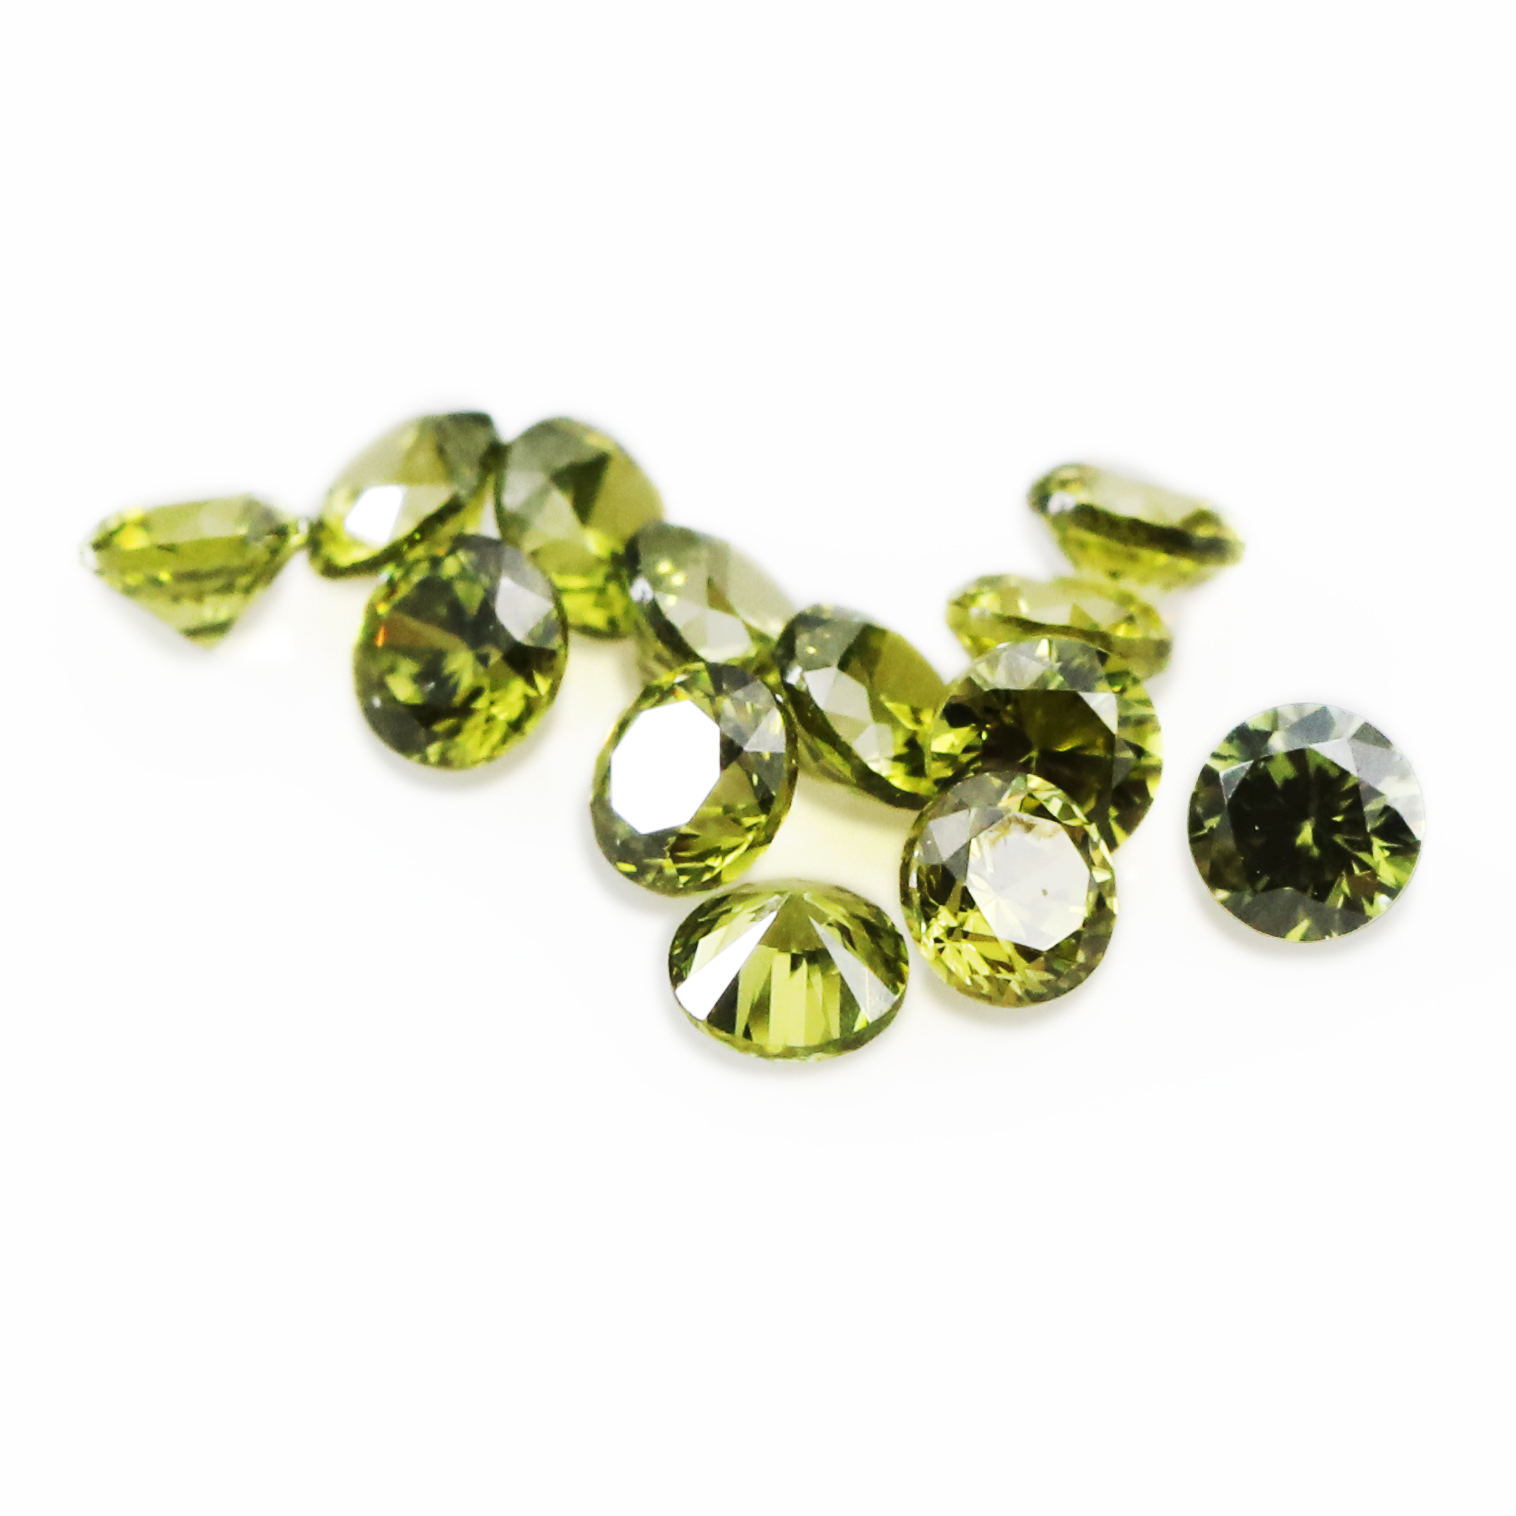 5Pcs January February April June August October November Imitation Birthstone Round Faceted Cubic Zirconia CZ Stone DIY Loose Stone Supplies 4110183-1 - Click Image to Close